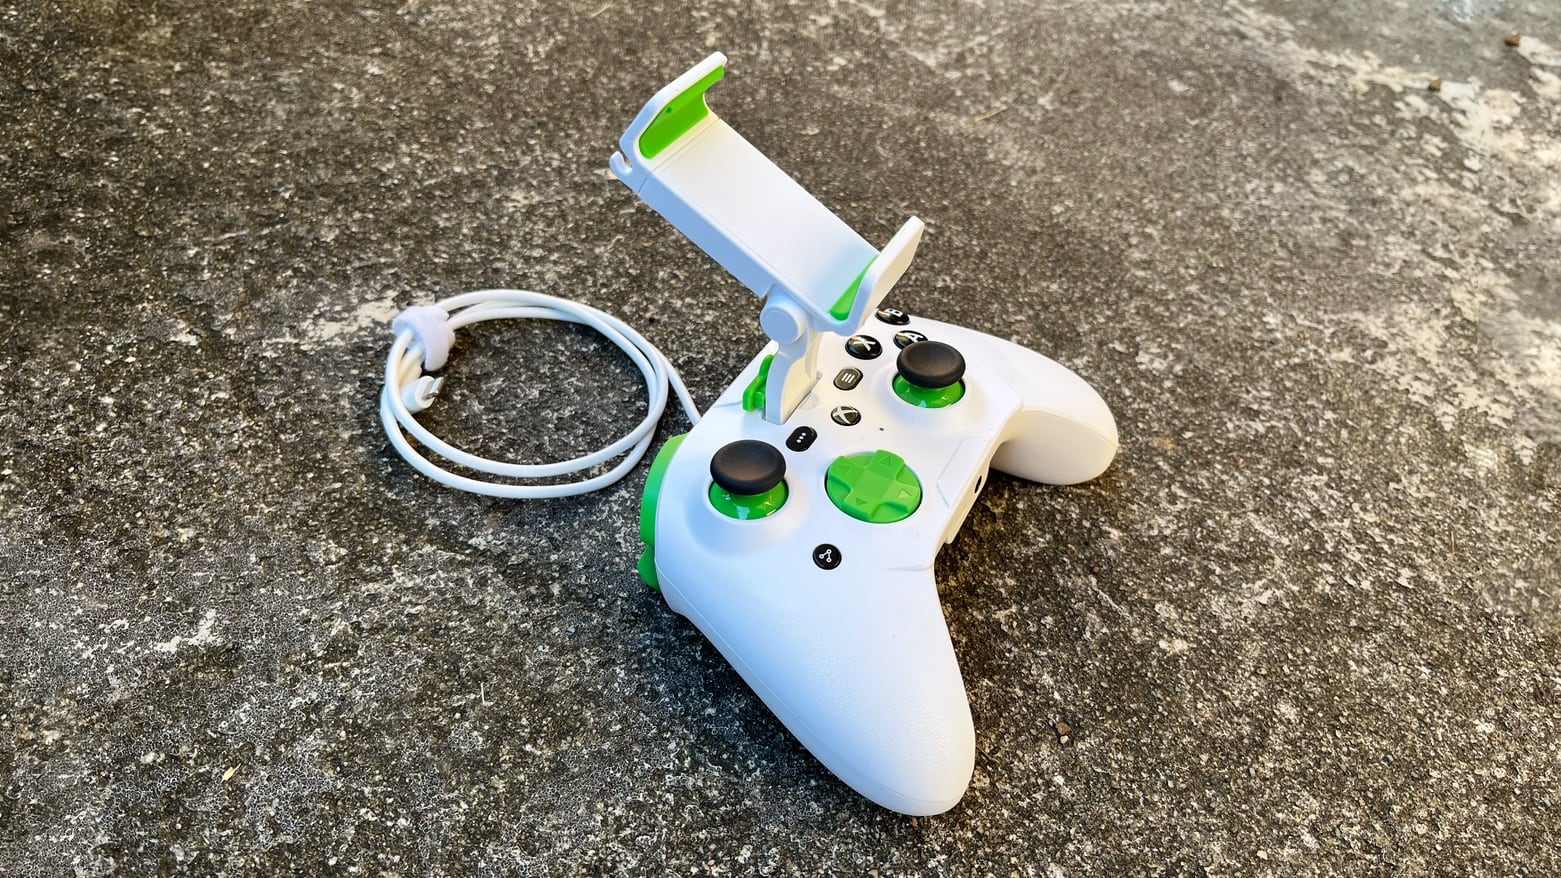 RiotPWR Controller for iOS (Xbox Edition) review: Meant for cloud